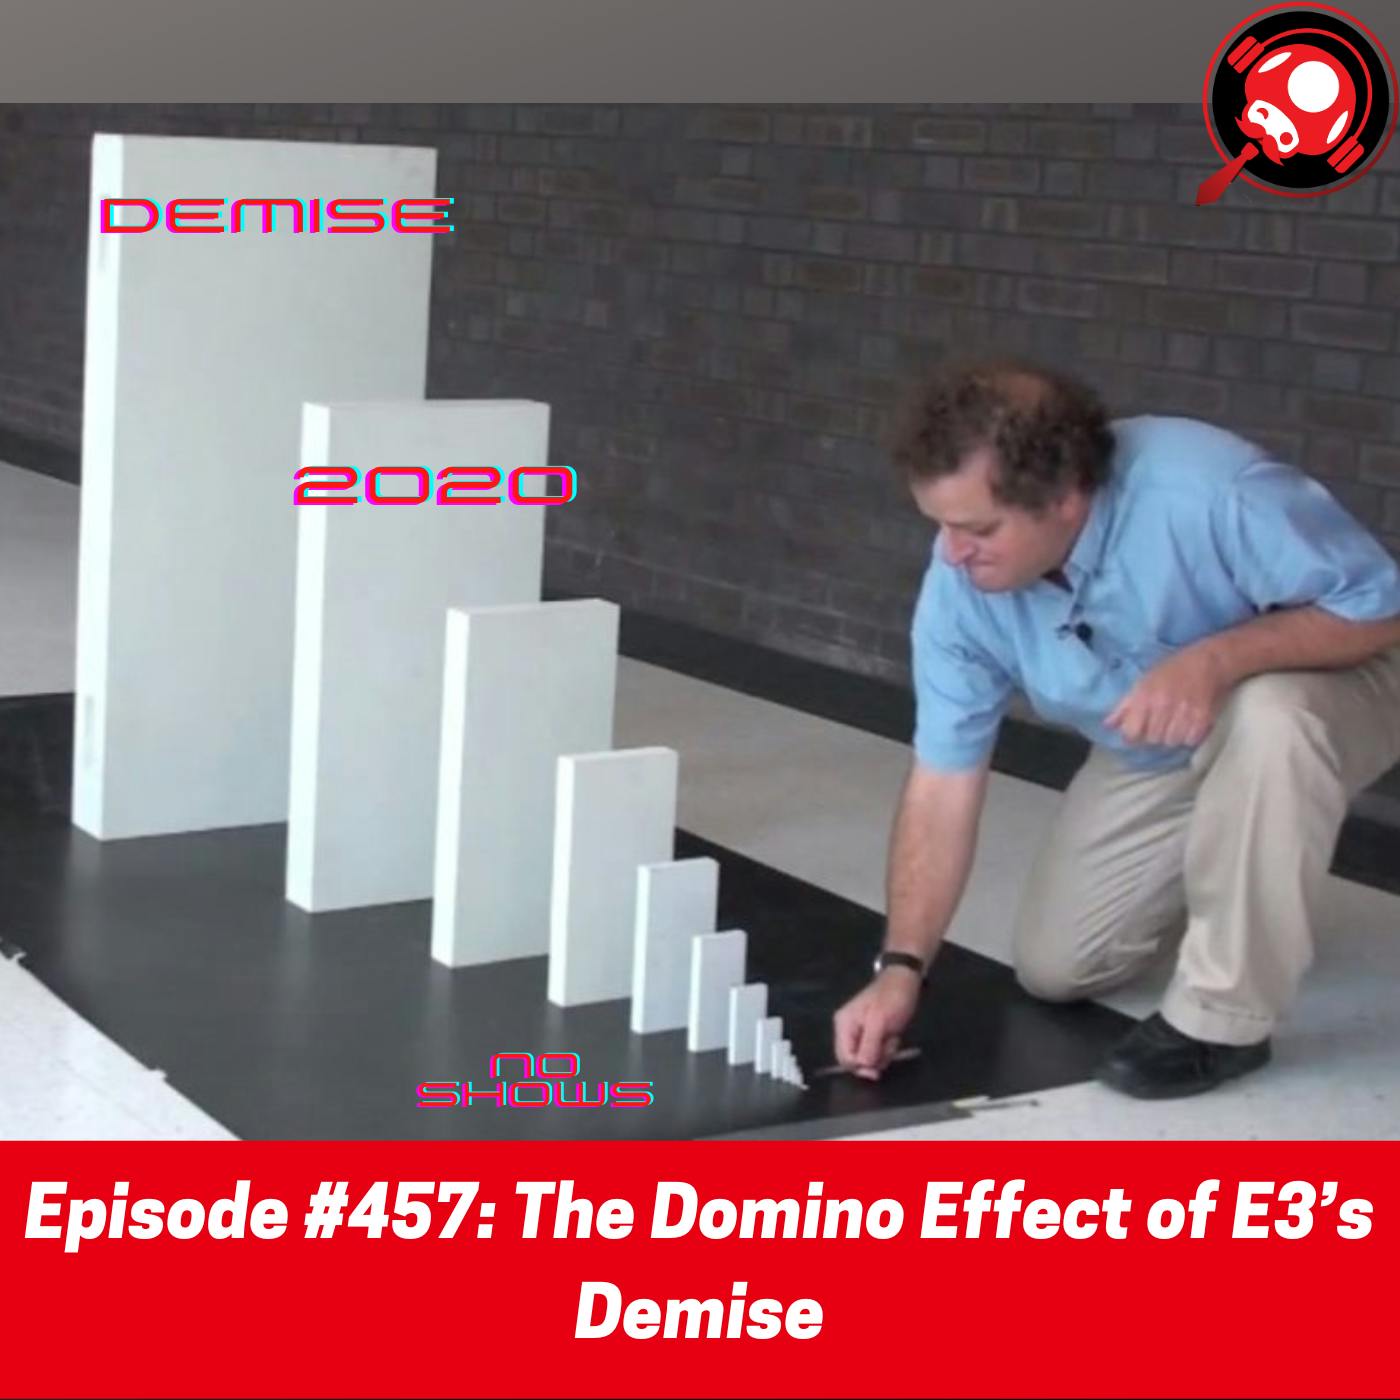 #457: The Domino Effect of E3’s Demise